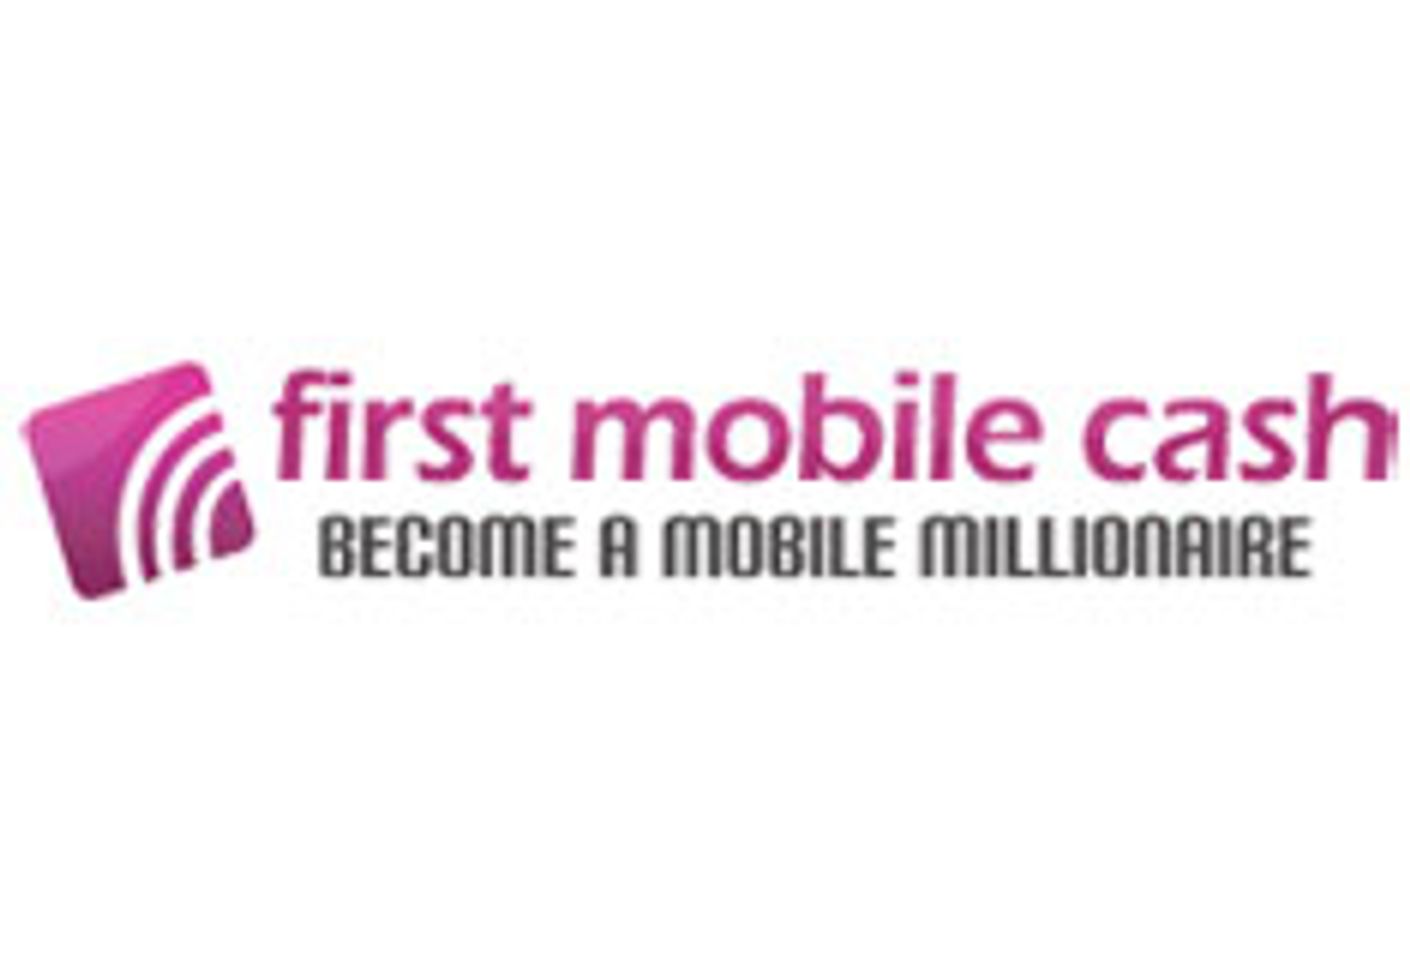 First Mobile Cash Partners with Ersties to Launch Mobile Website